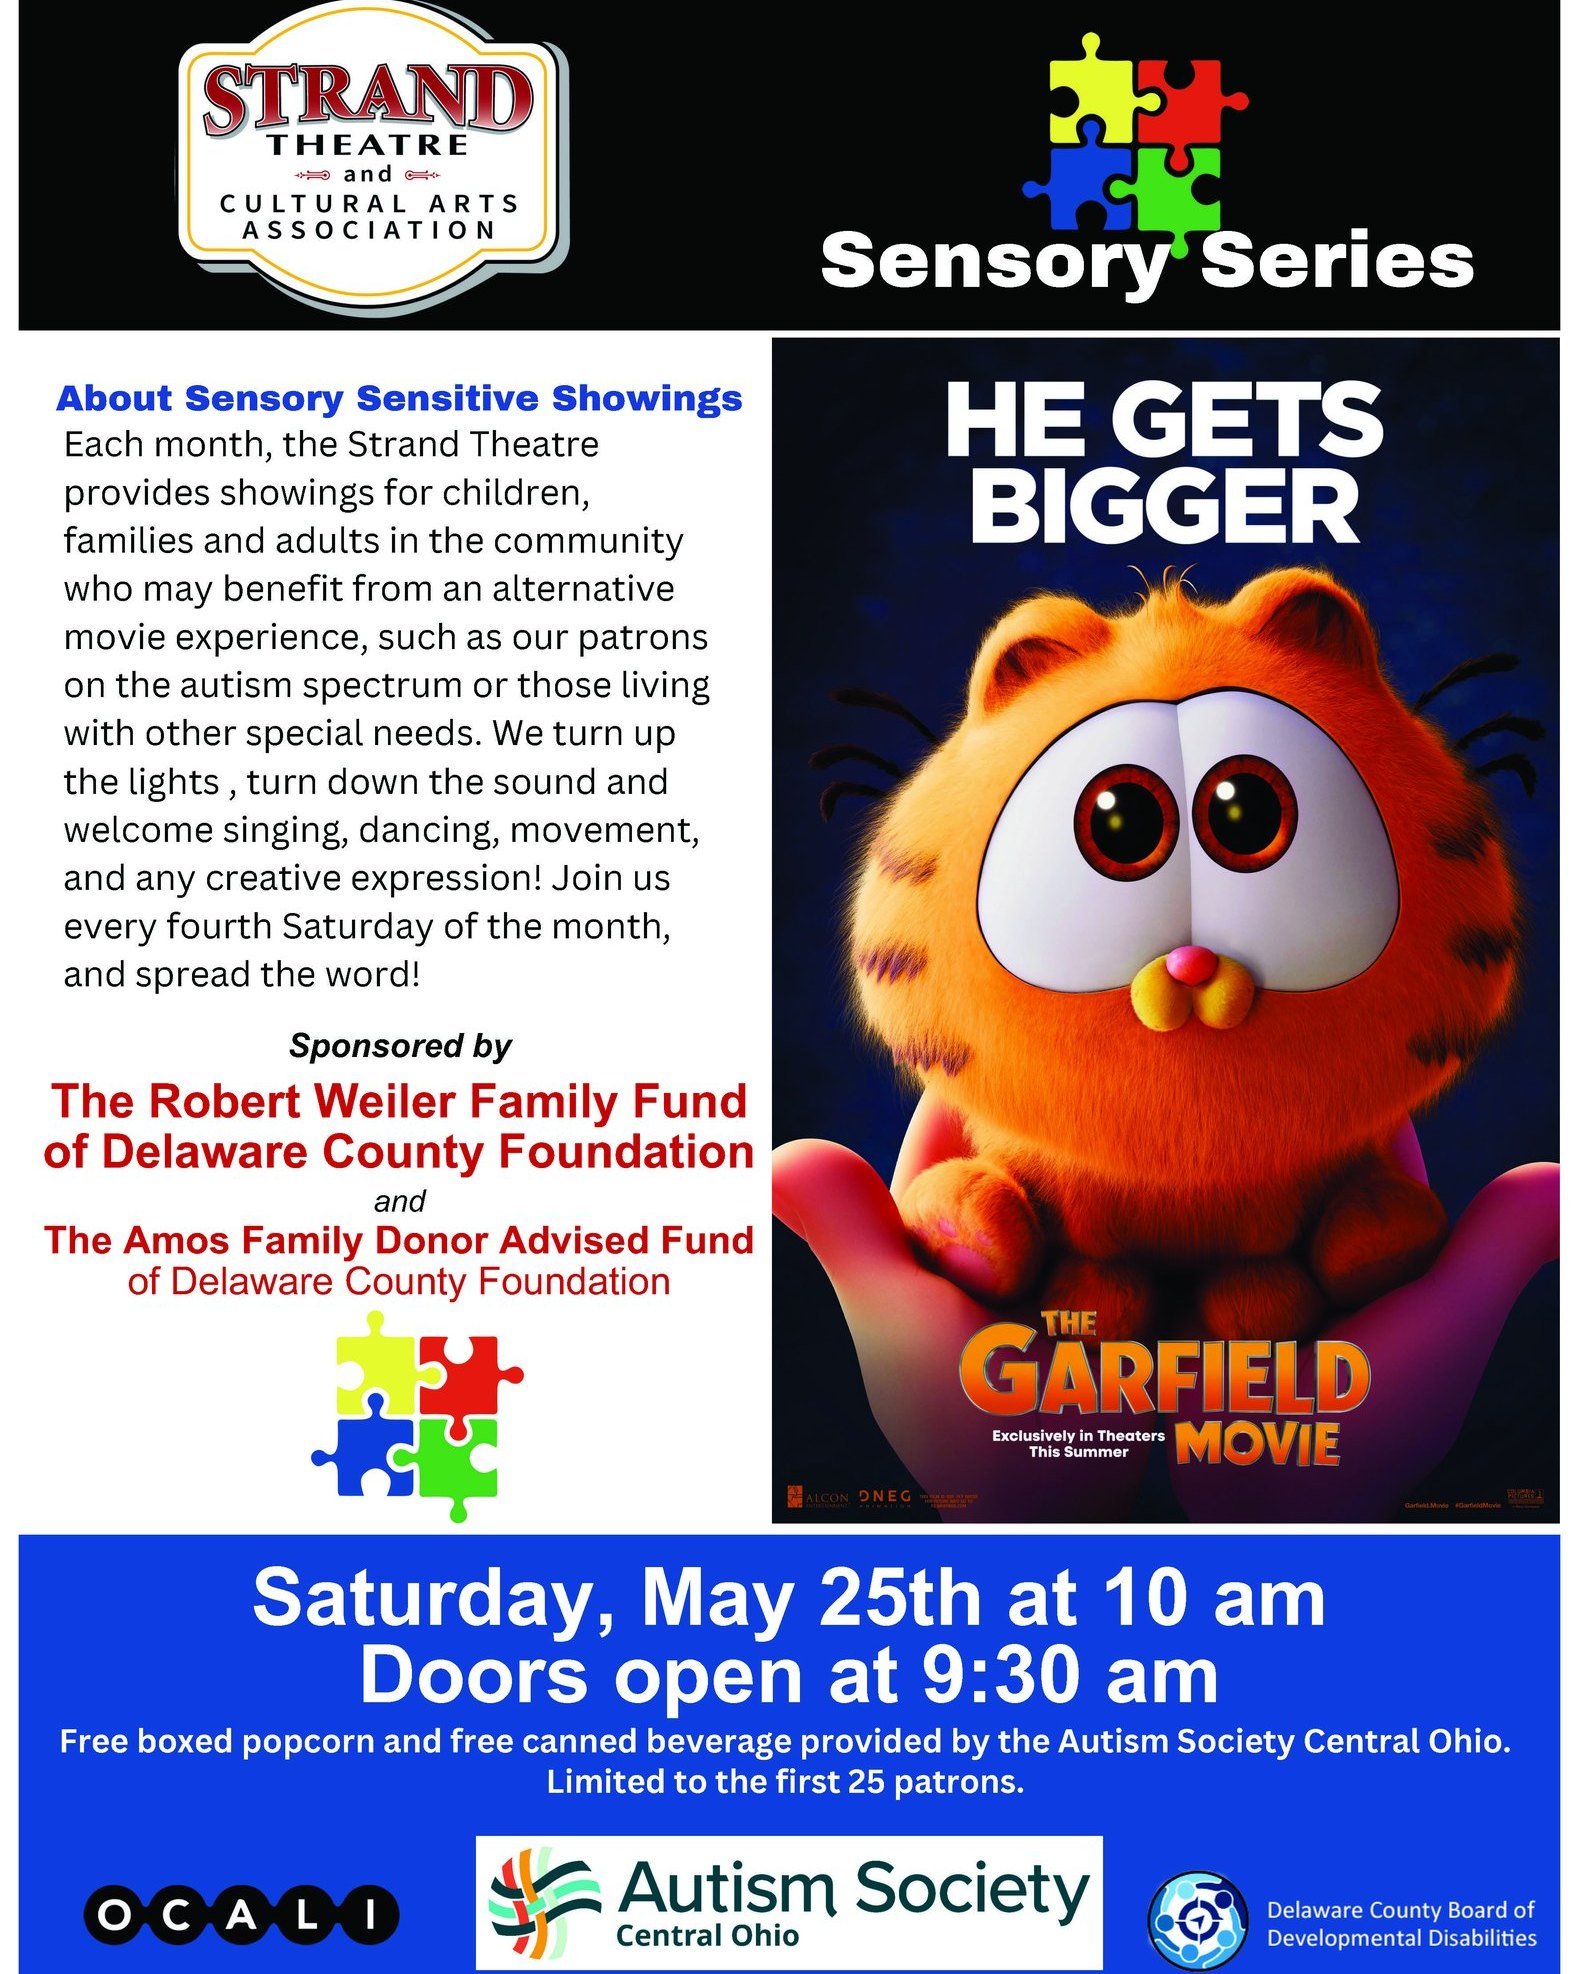 Saturday, May 25th - Sensory Series - &quot;The Garfield Movie&quot; - Starring Chris Pratt and Samuel L. Jackson
https://thestrandtheatre.net/events-and-movies-coming-soon/2024/5/24/sensory-series-the-garfield-movie